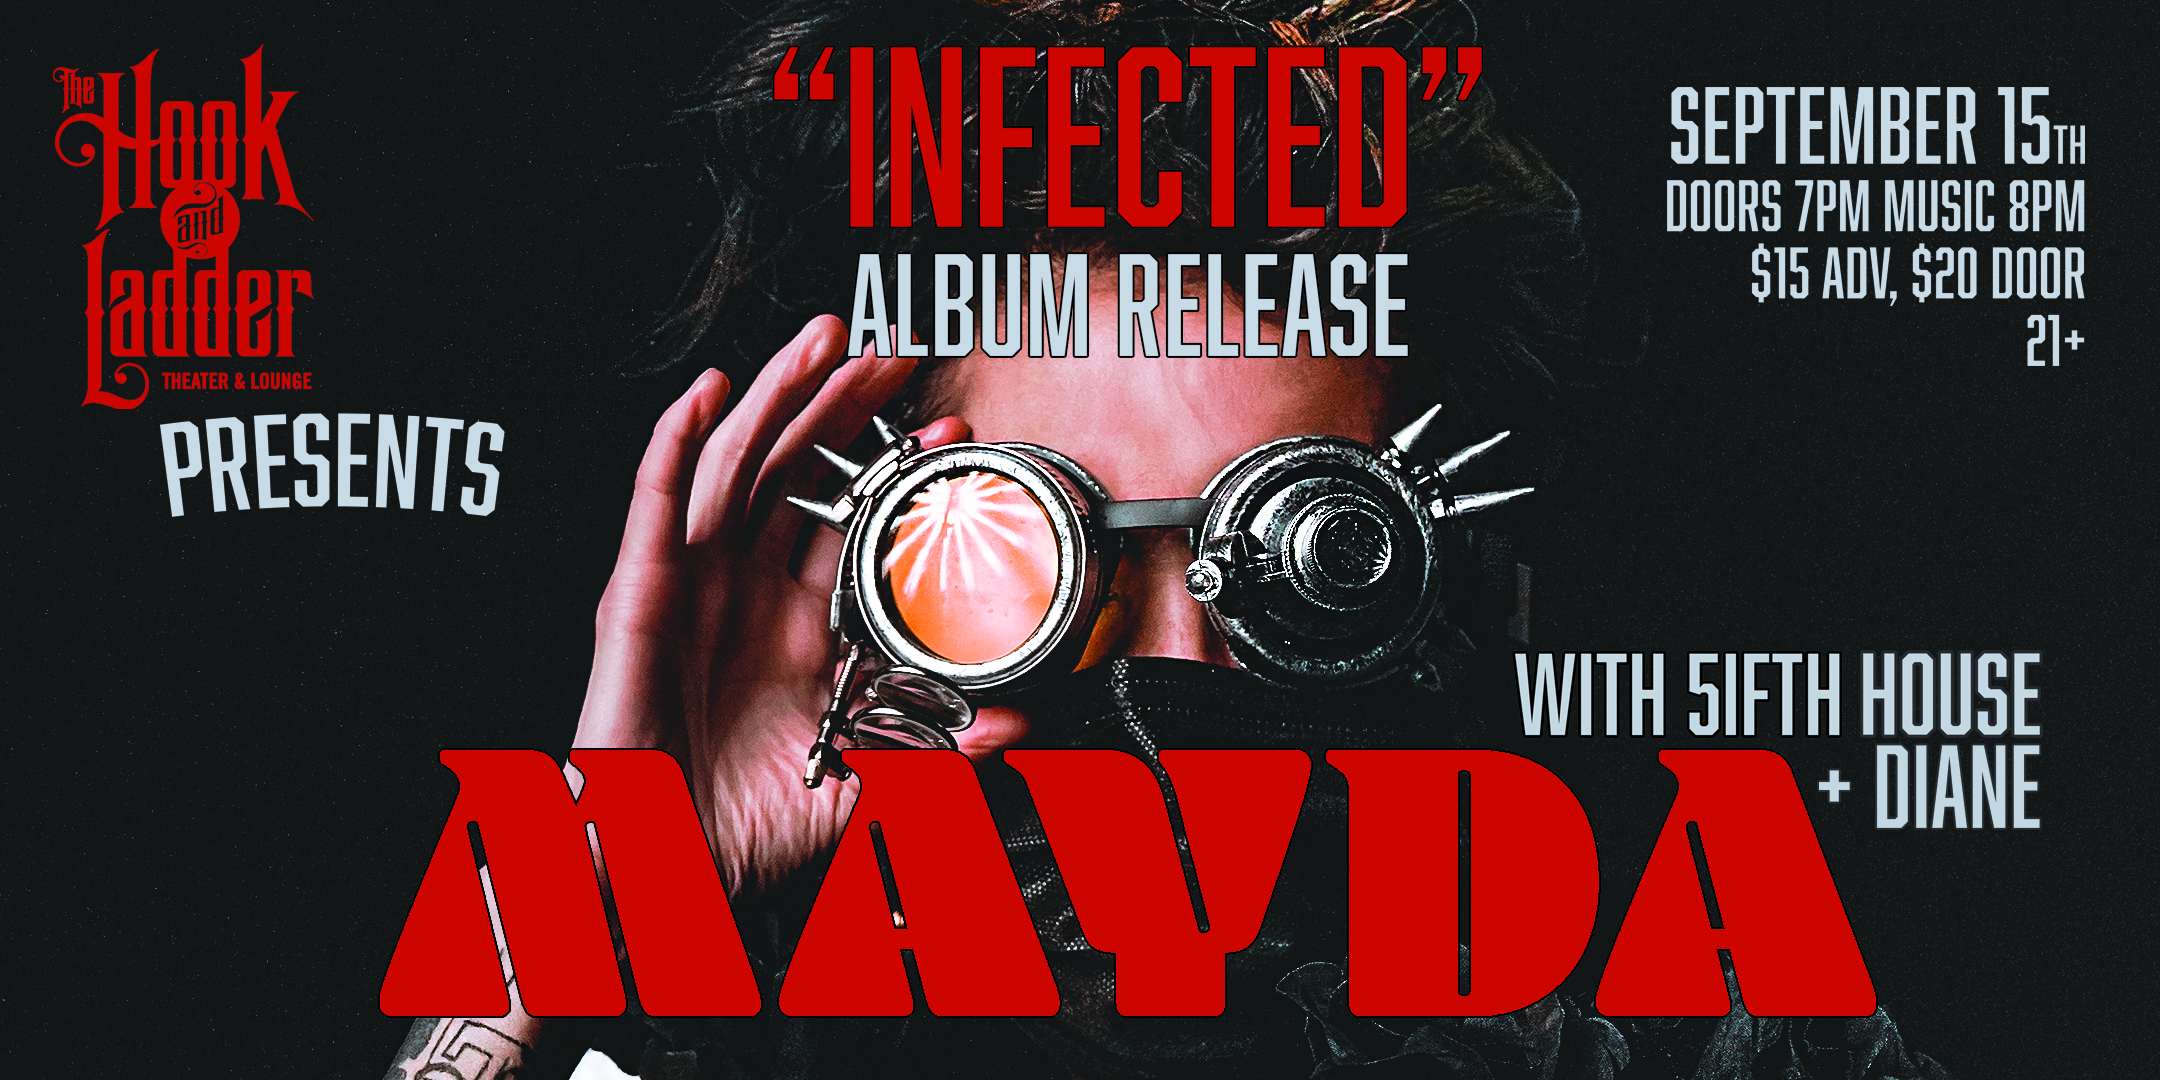 MAYDA Album & Video Release Party with 5ifth House and Diane Friday, September 15 The Hook and Ladder Theater Doors 7:00pm :: Music 8:00pm :: 21+ GA: $15 ADV / $20 DOS